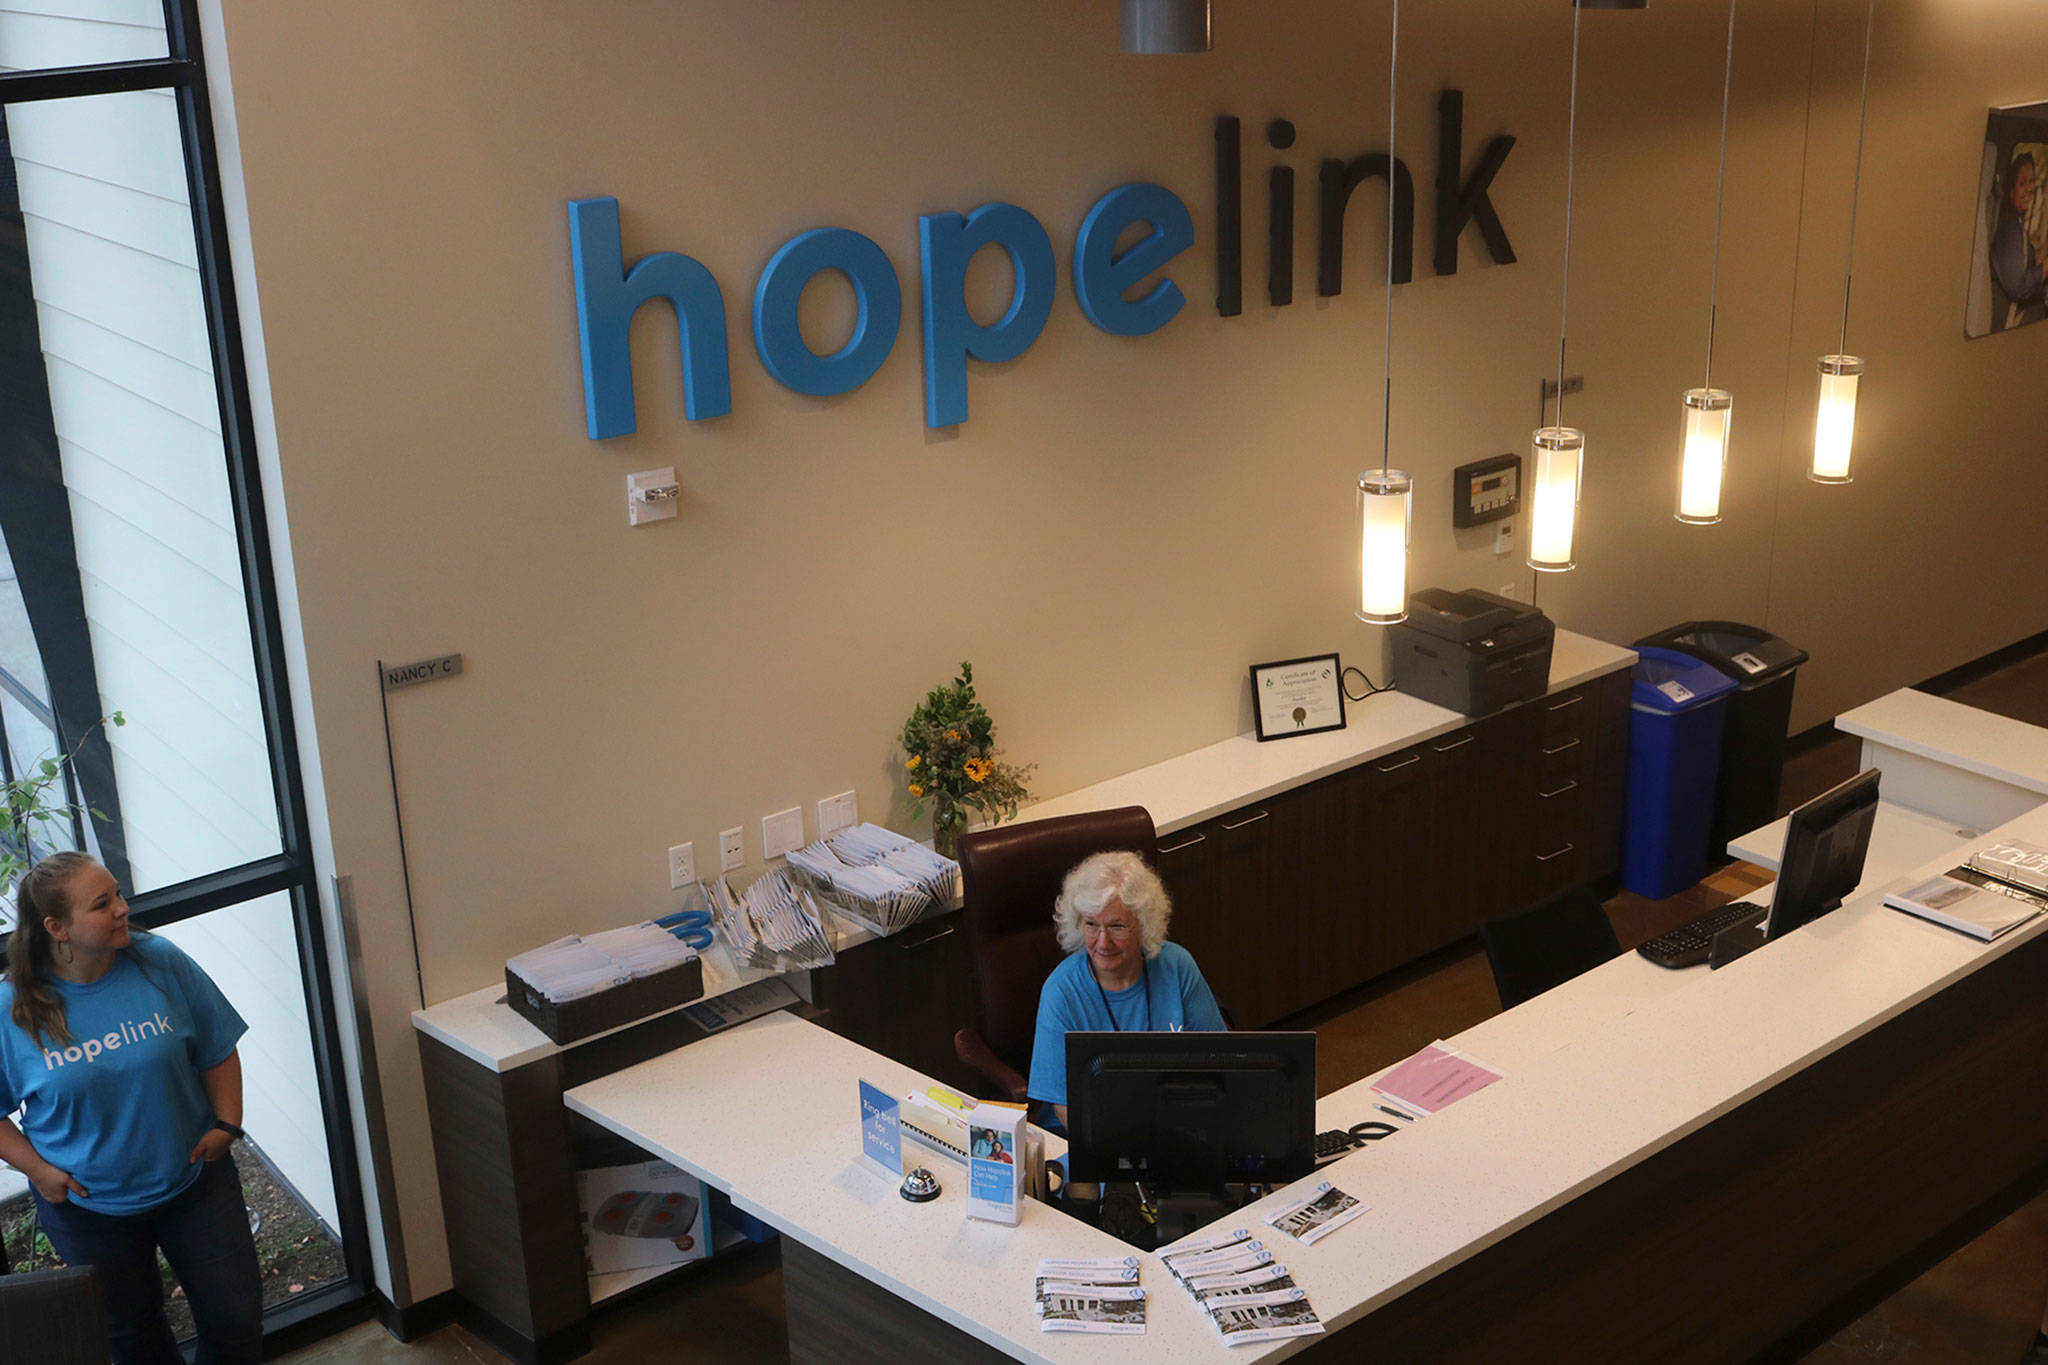 Hopelink’s new center at 8990 154th Ave. NE aims to make services more accessible and welcoming. Katie Metzger/staff photo